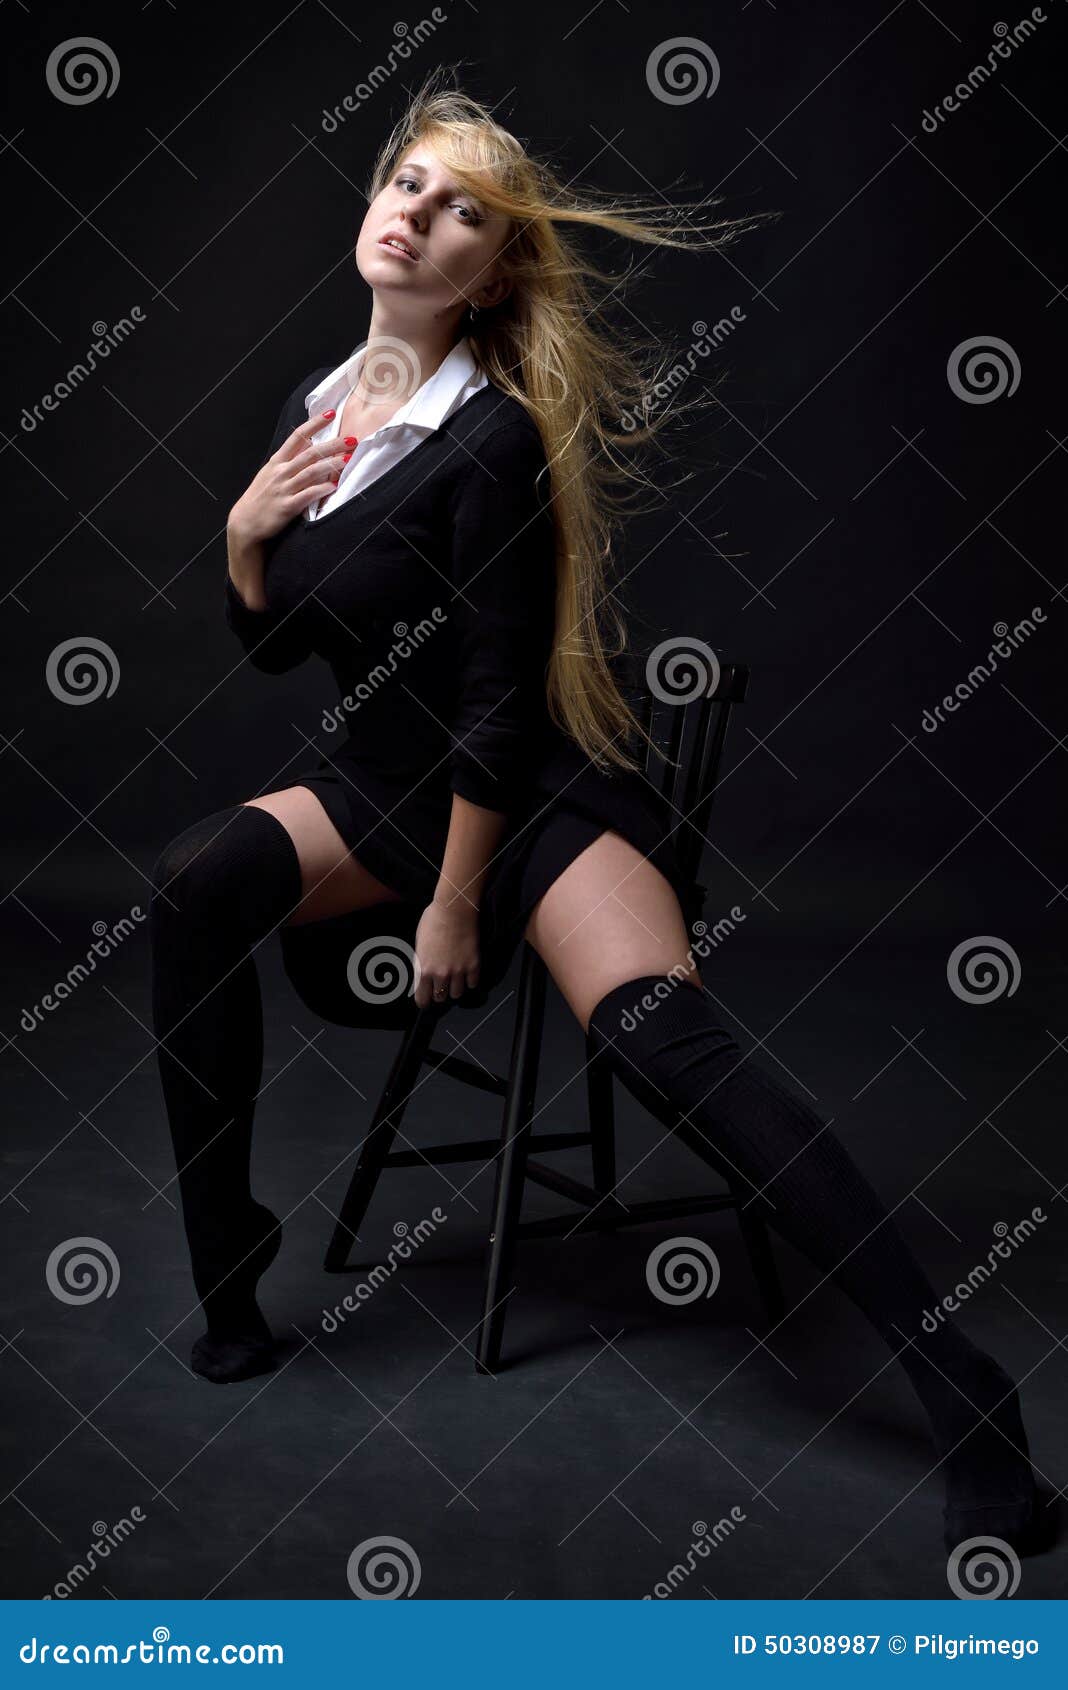 Beautiful Woman in Black Dress and Stockings Stock Image - Image